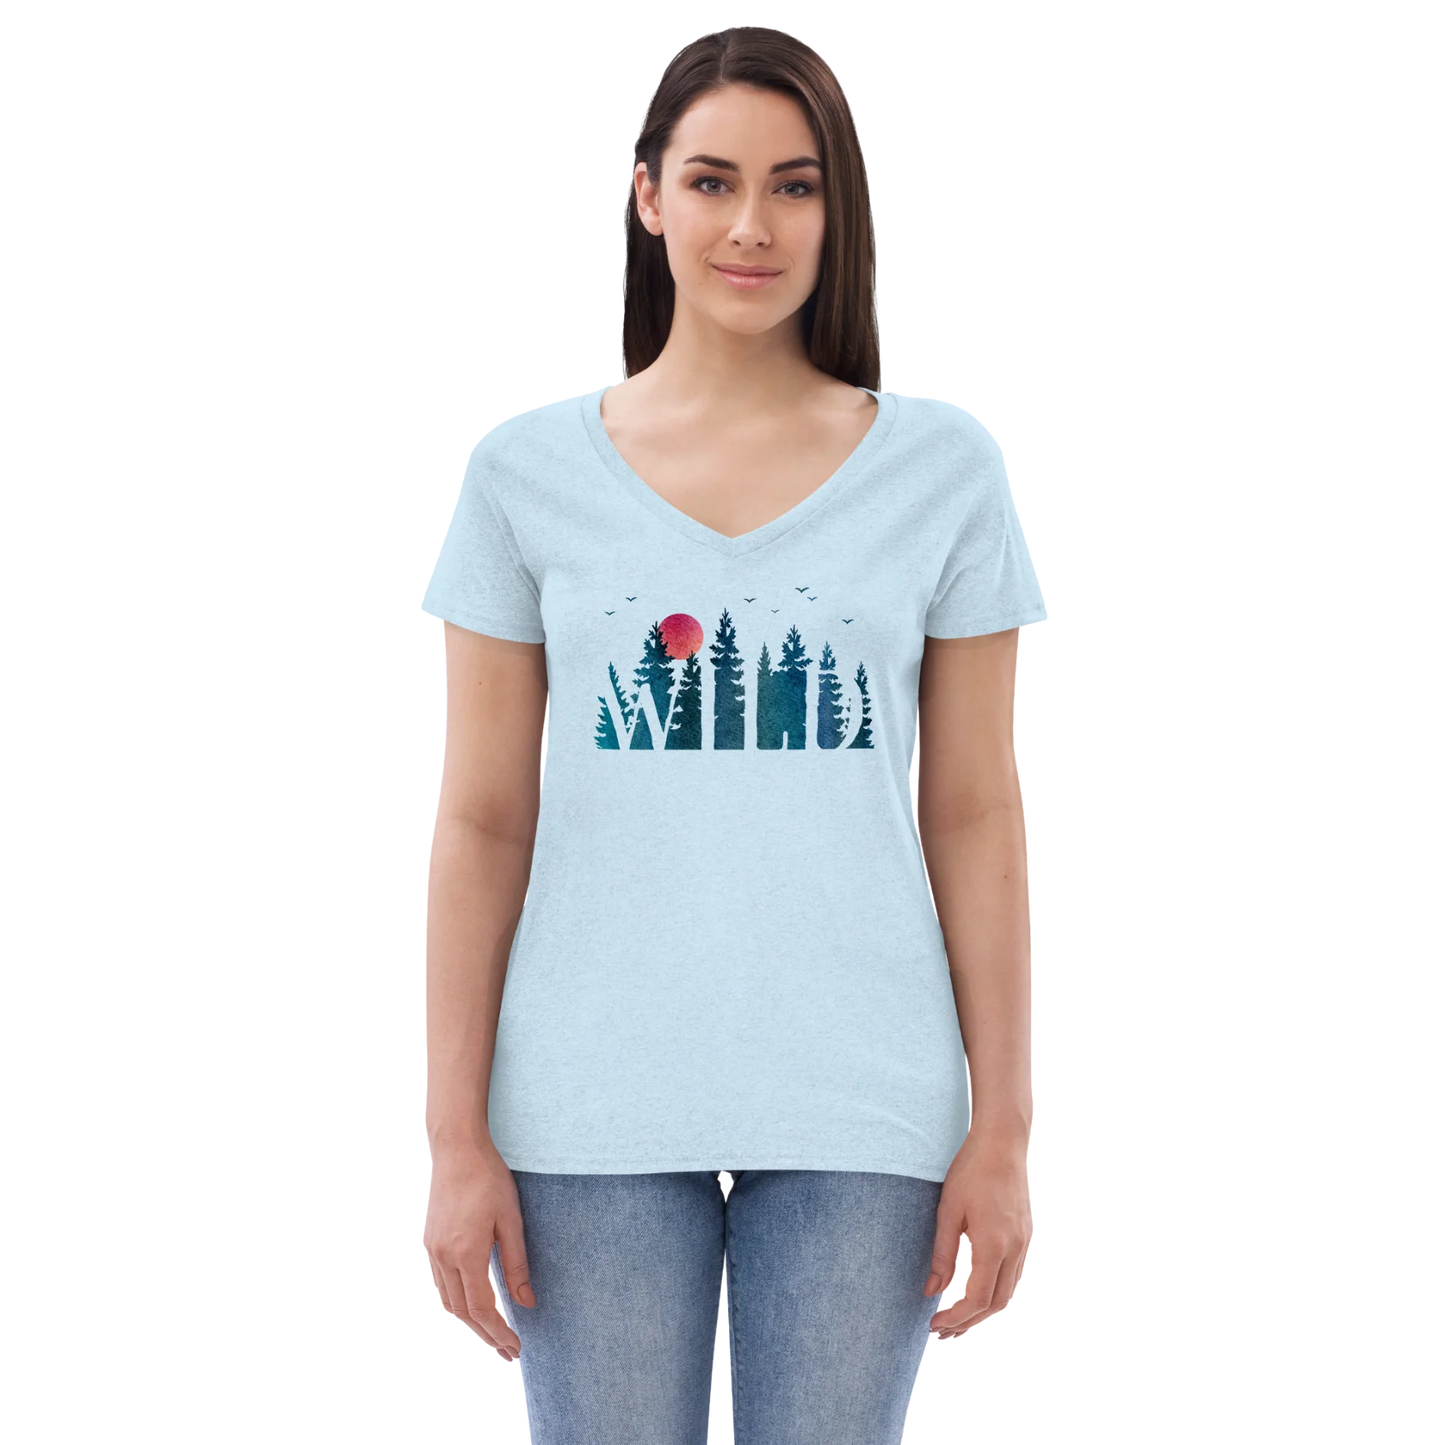 "Wild Soul in Blue Shades" Recycled  V-neck T-shirt